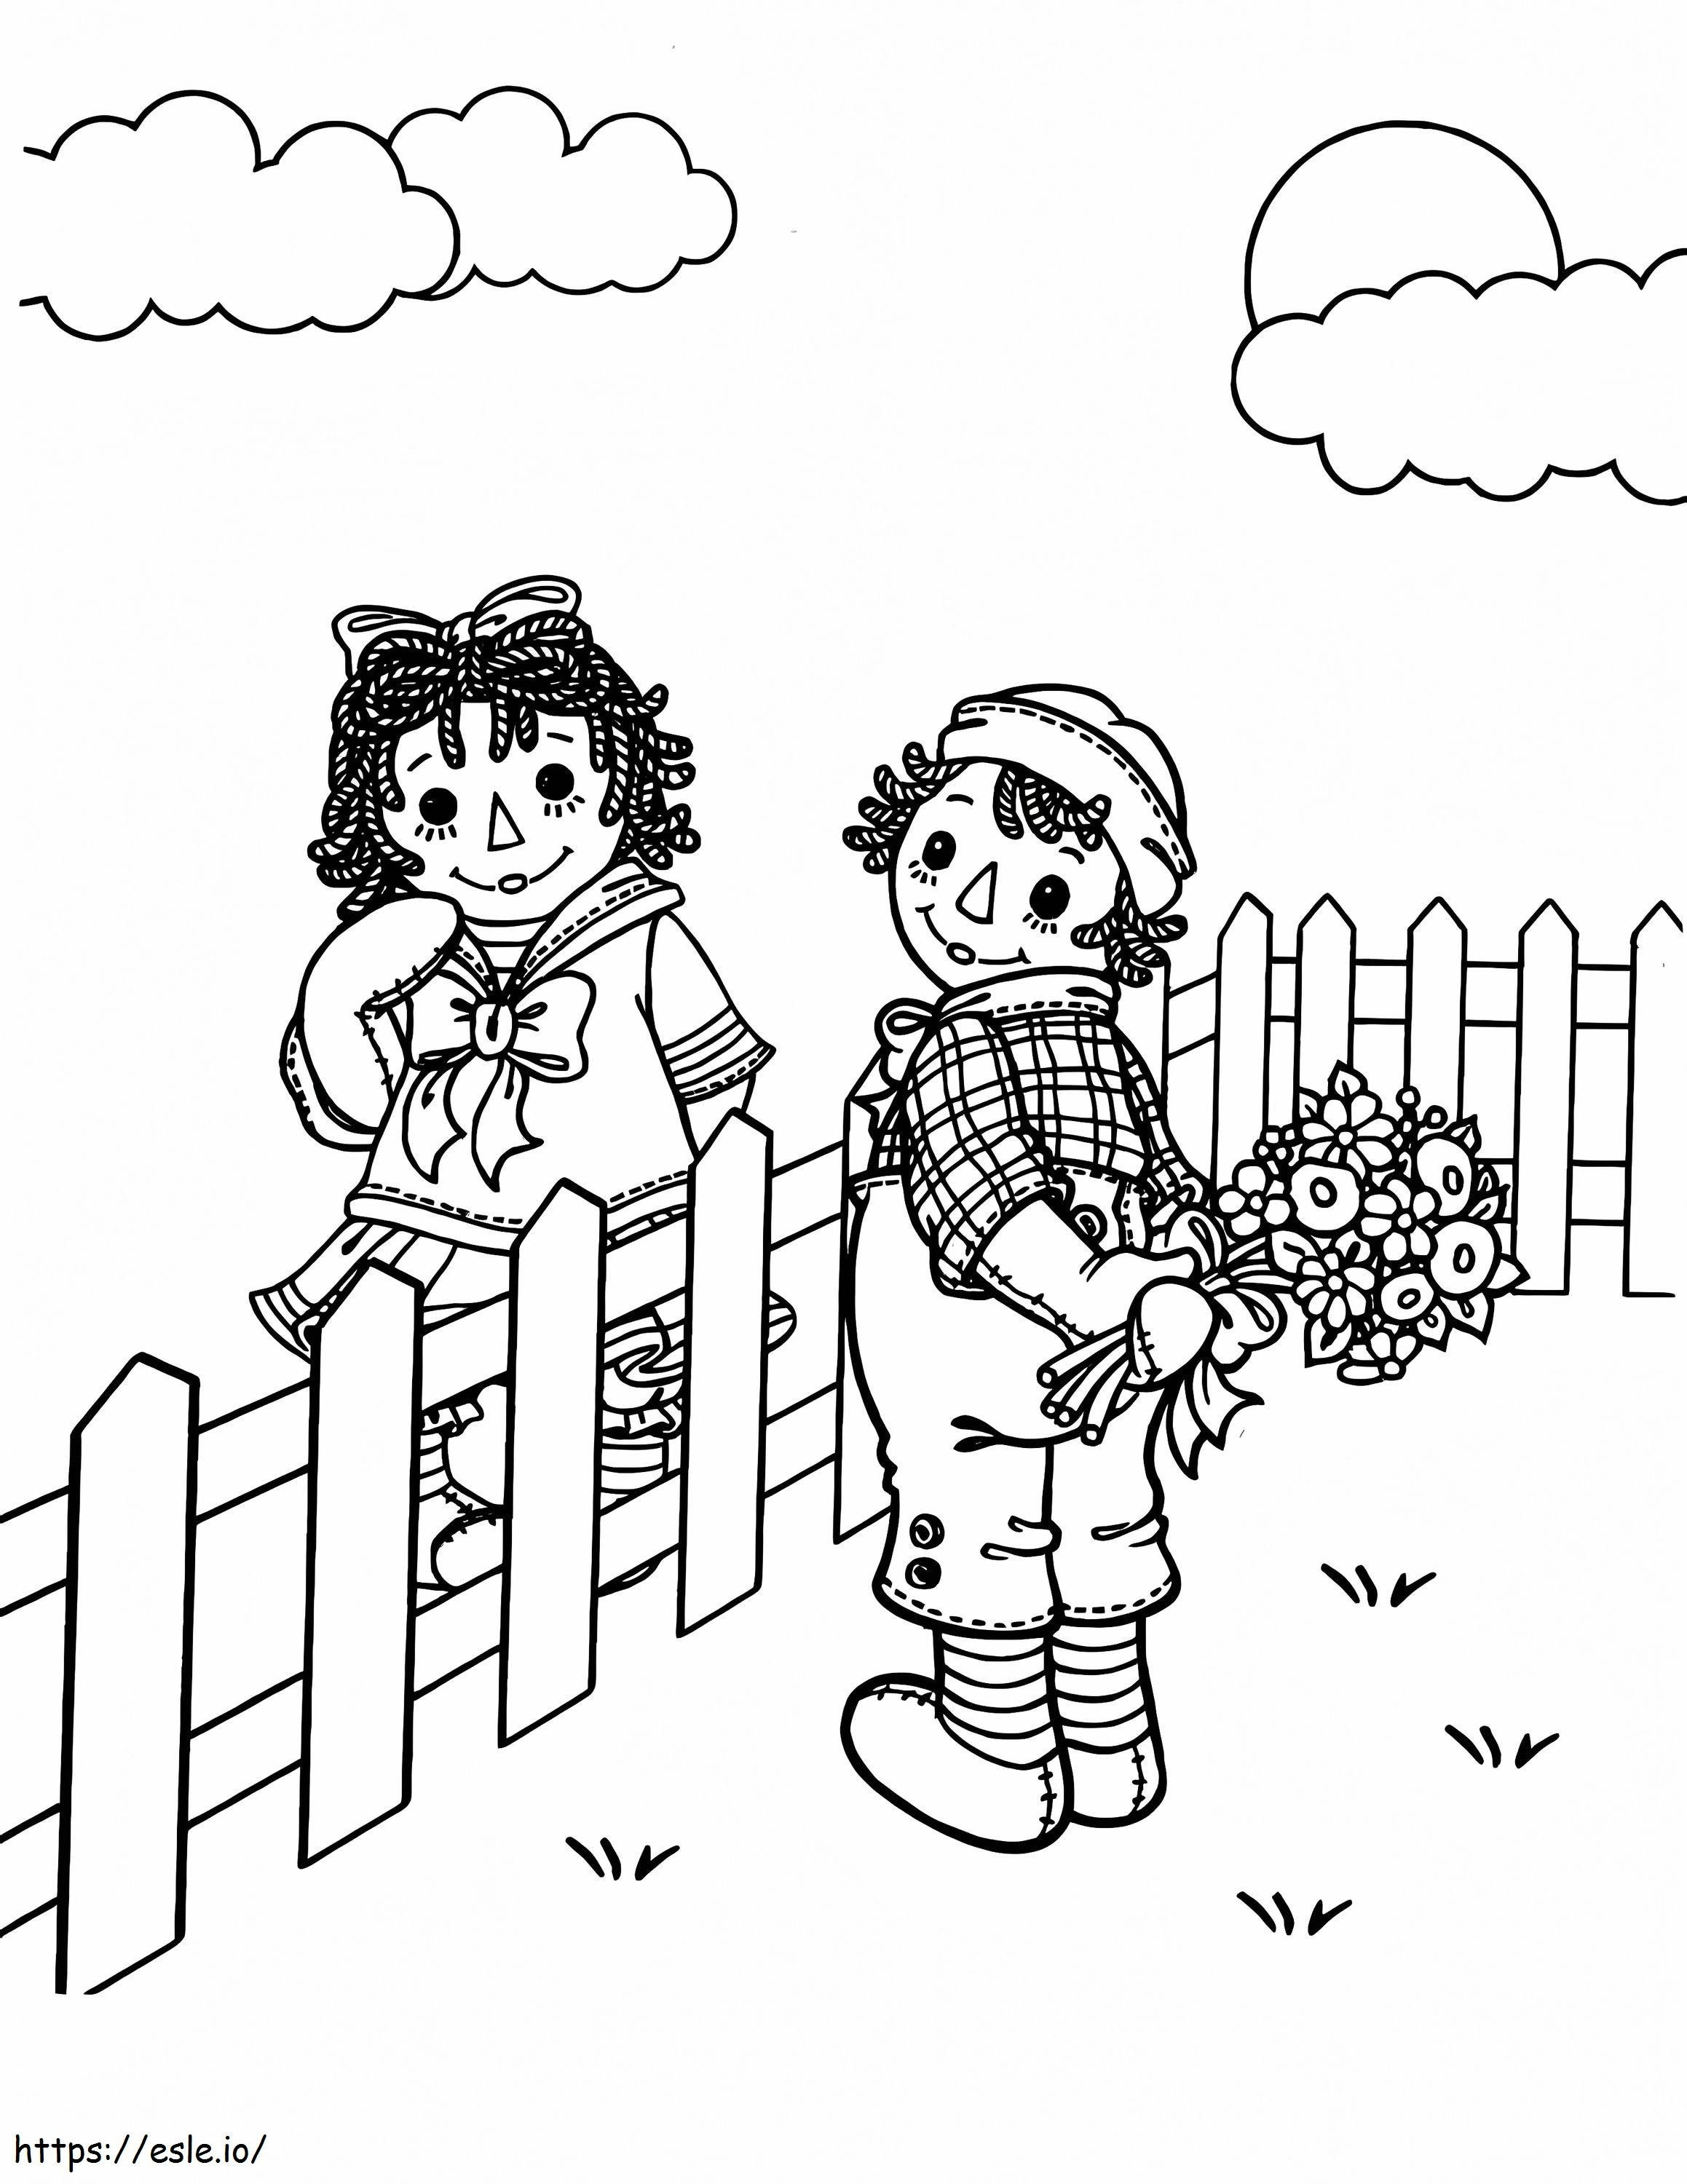 Raggedy Ann And Andy 15 coloring page